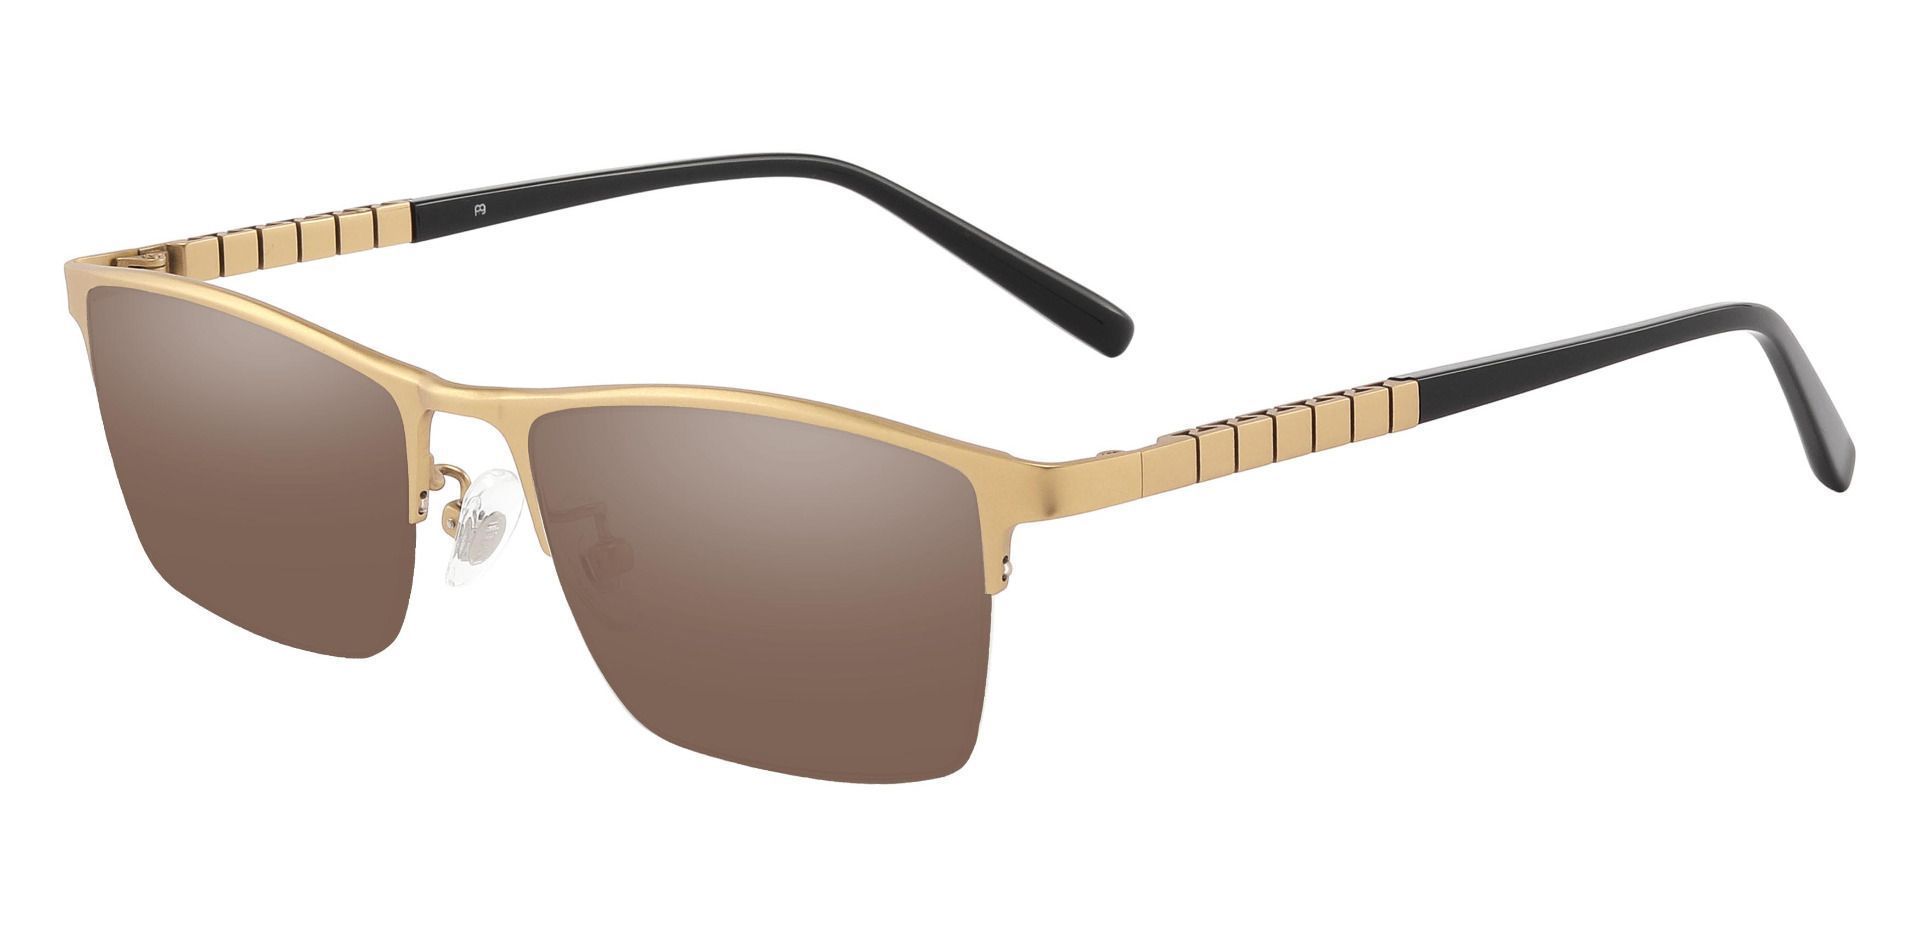 Maine Rectangle Progressive Sunglasses - Gold Frame With Brown Lenses